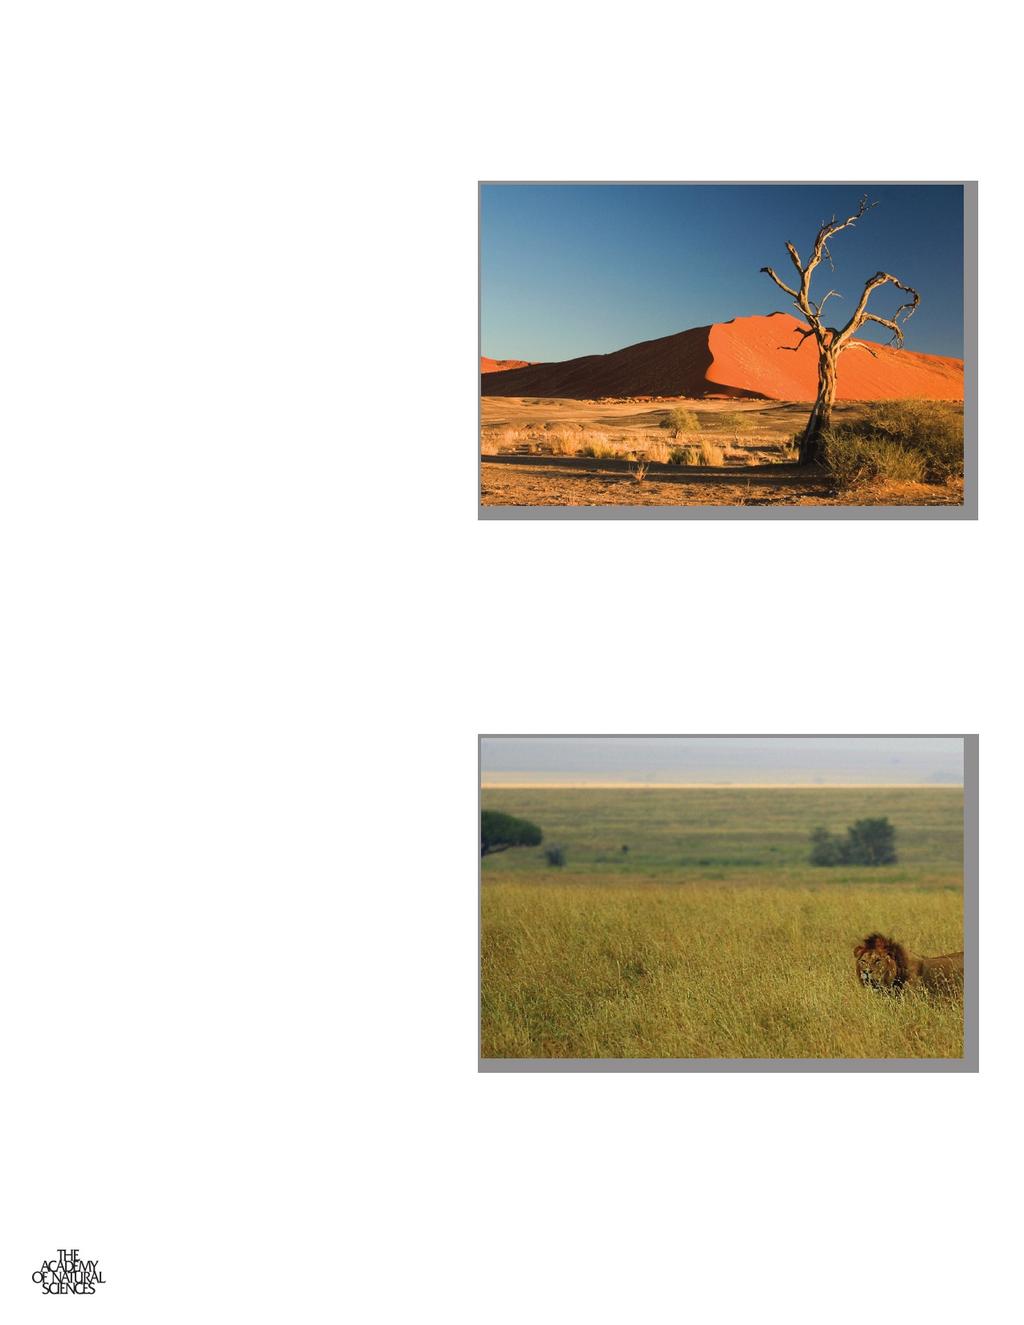 Habitats Below are some of the habitats you will see in African and Asian Hall while doing these activities: Hot Desert: Hot and dry with few plants and sandy soil.